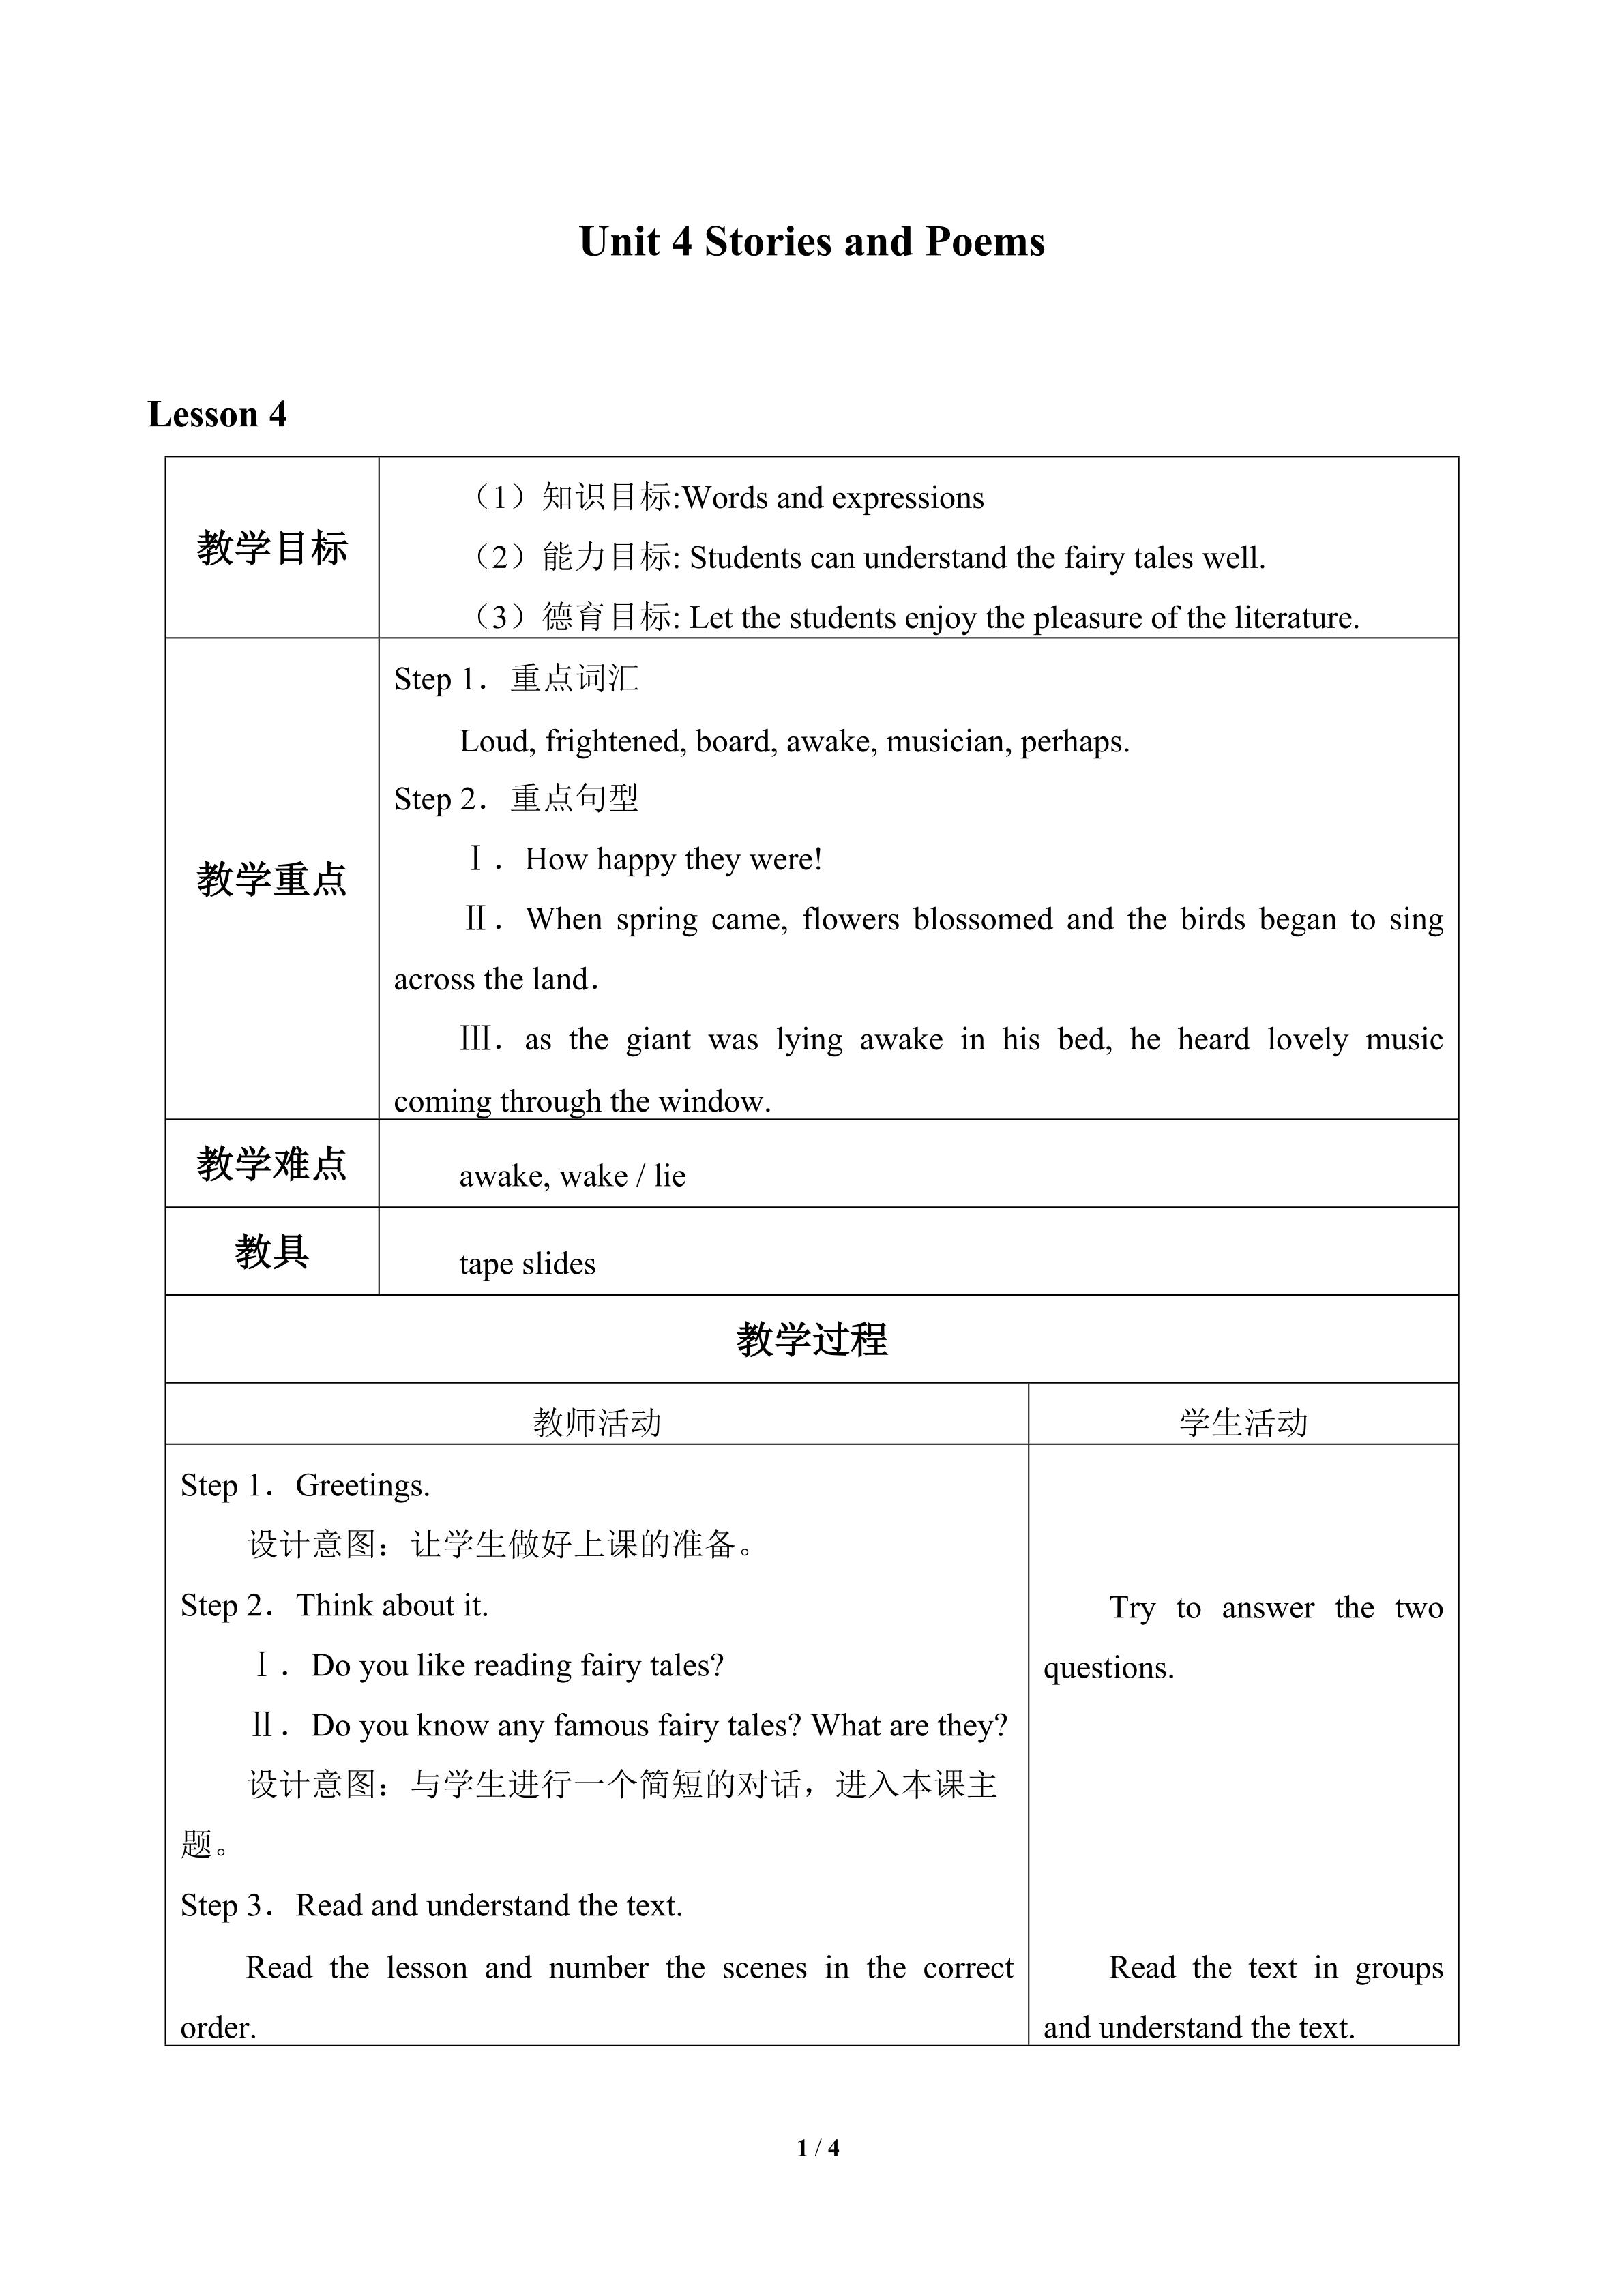 Unit 4 Stories and Poems_教案4